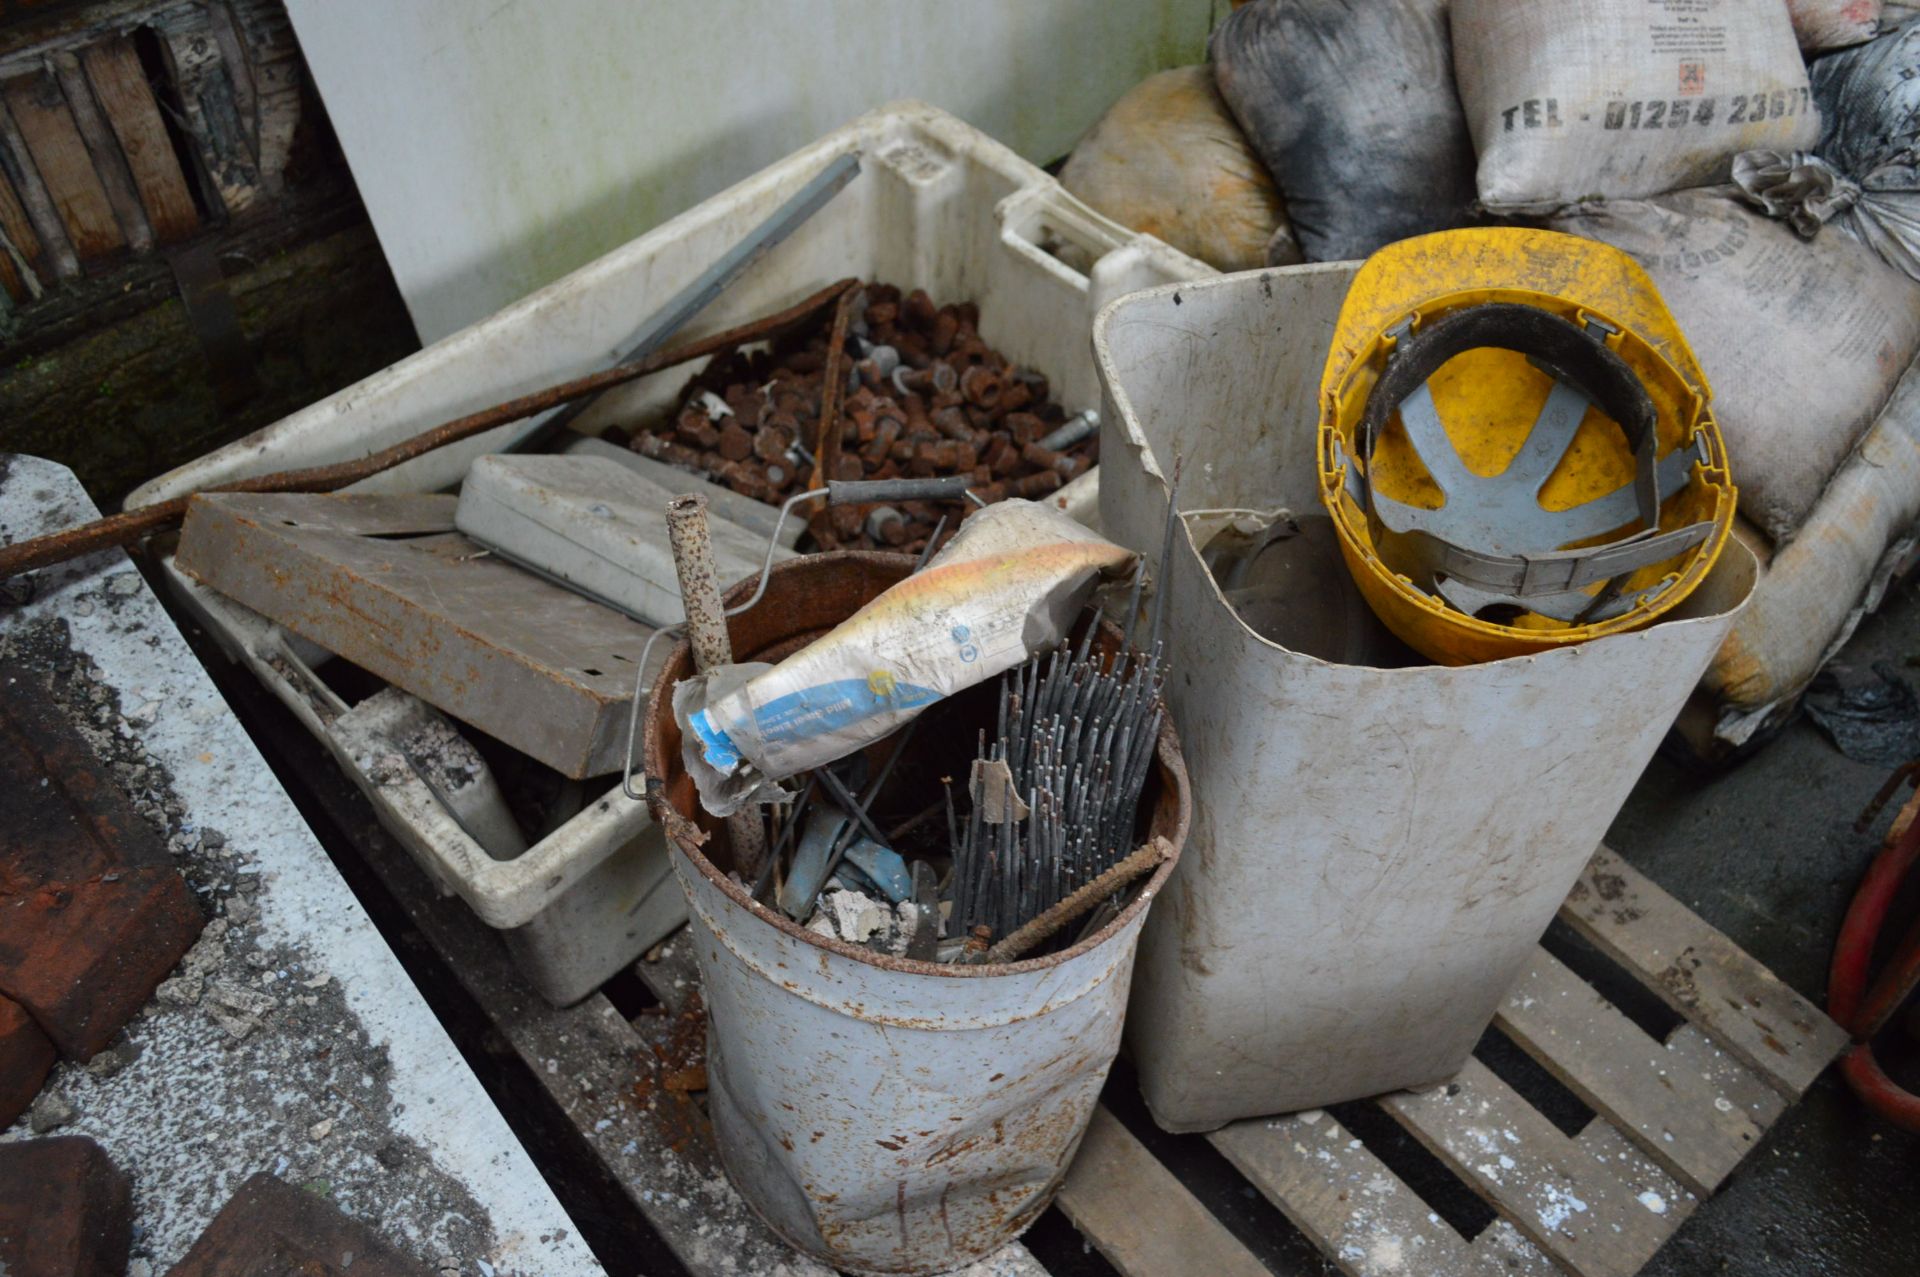 Contents of Pallet, including nuts and bolts